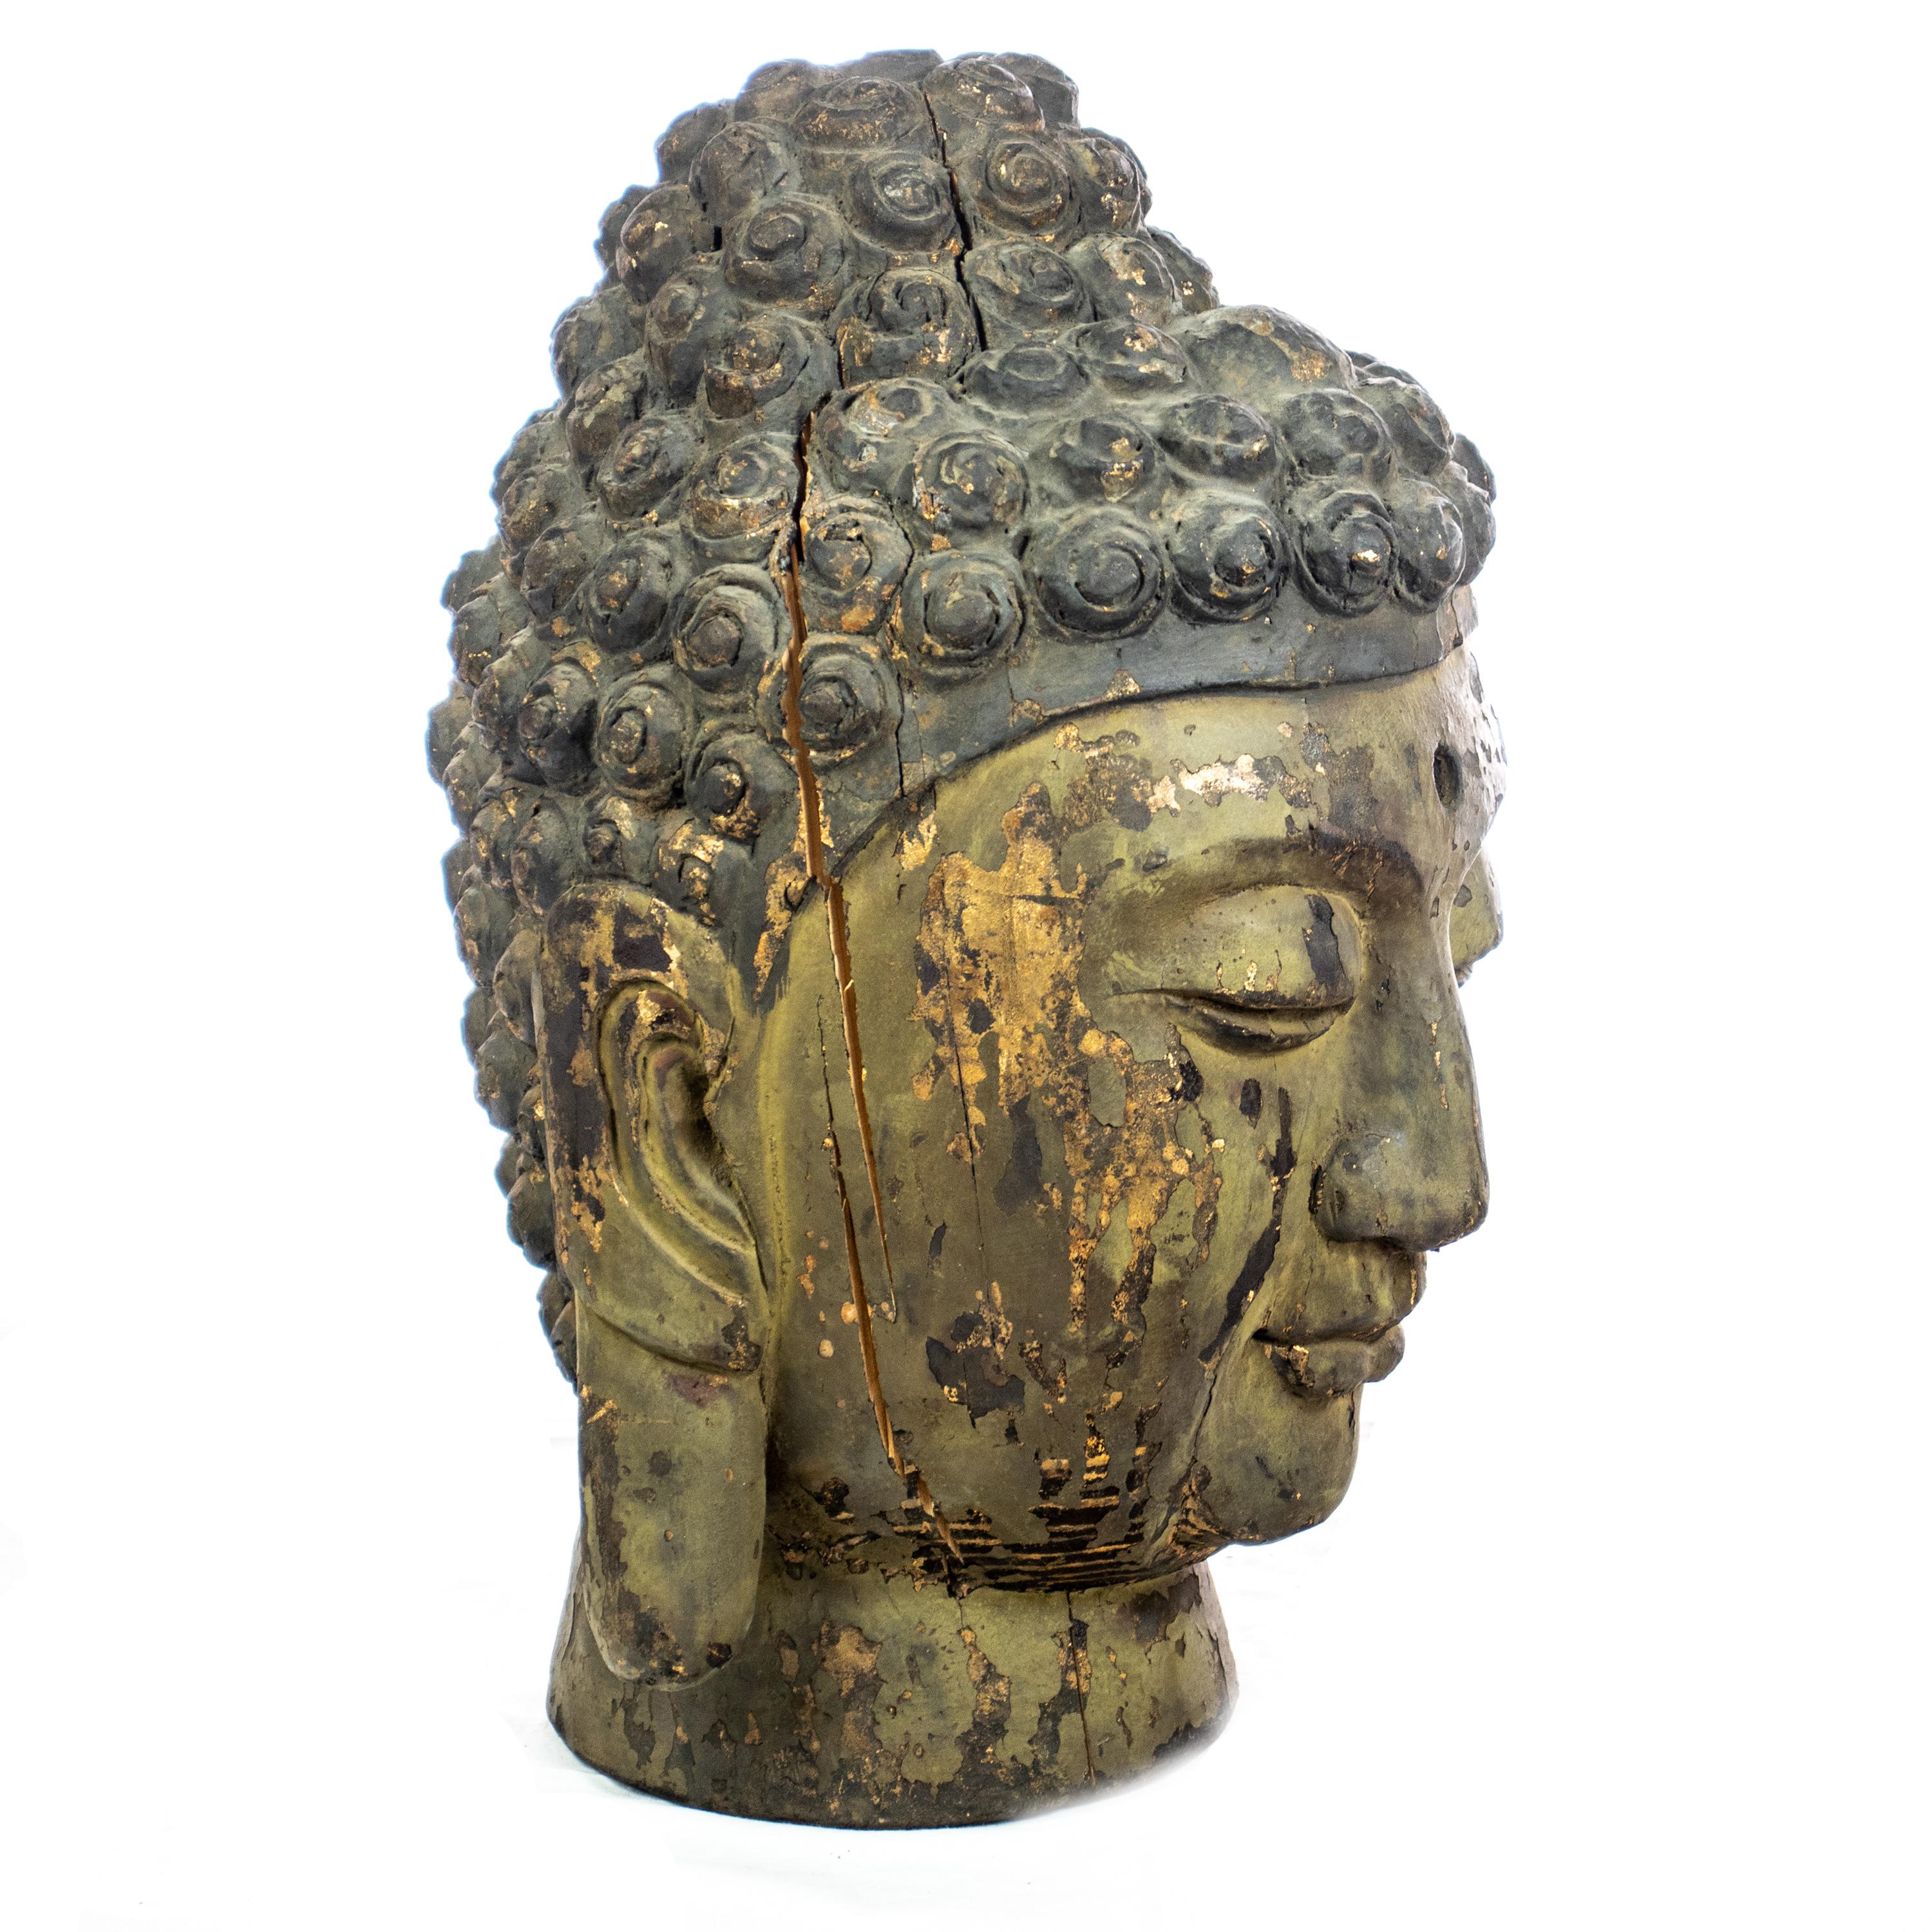 Hand-Carved Buddha Antique Handmade Carved Wood Head Bust Asian Meditation Sculpture